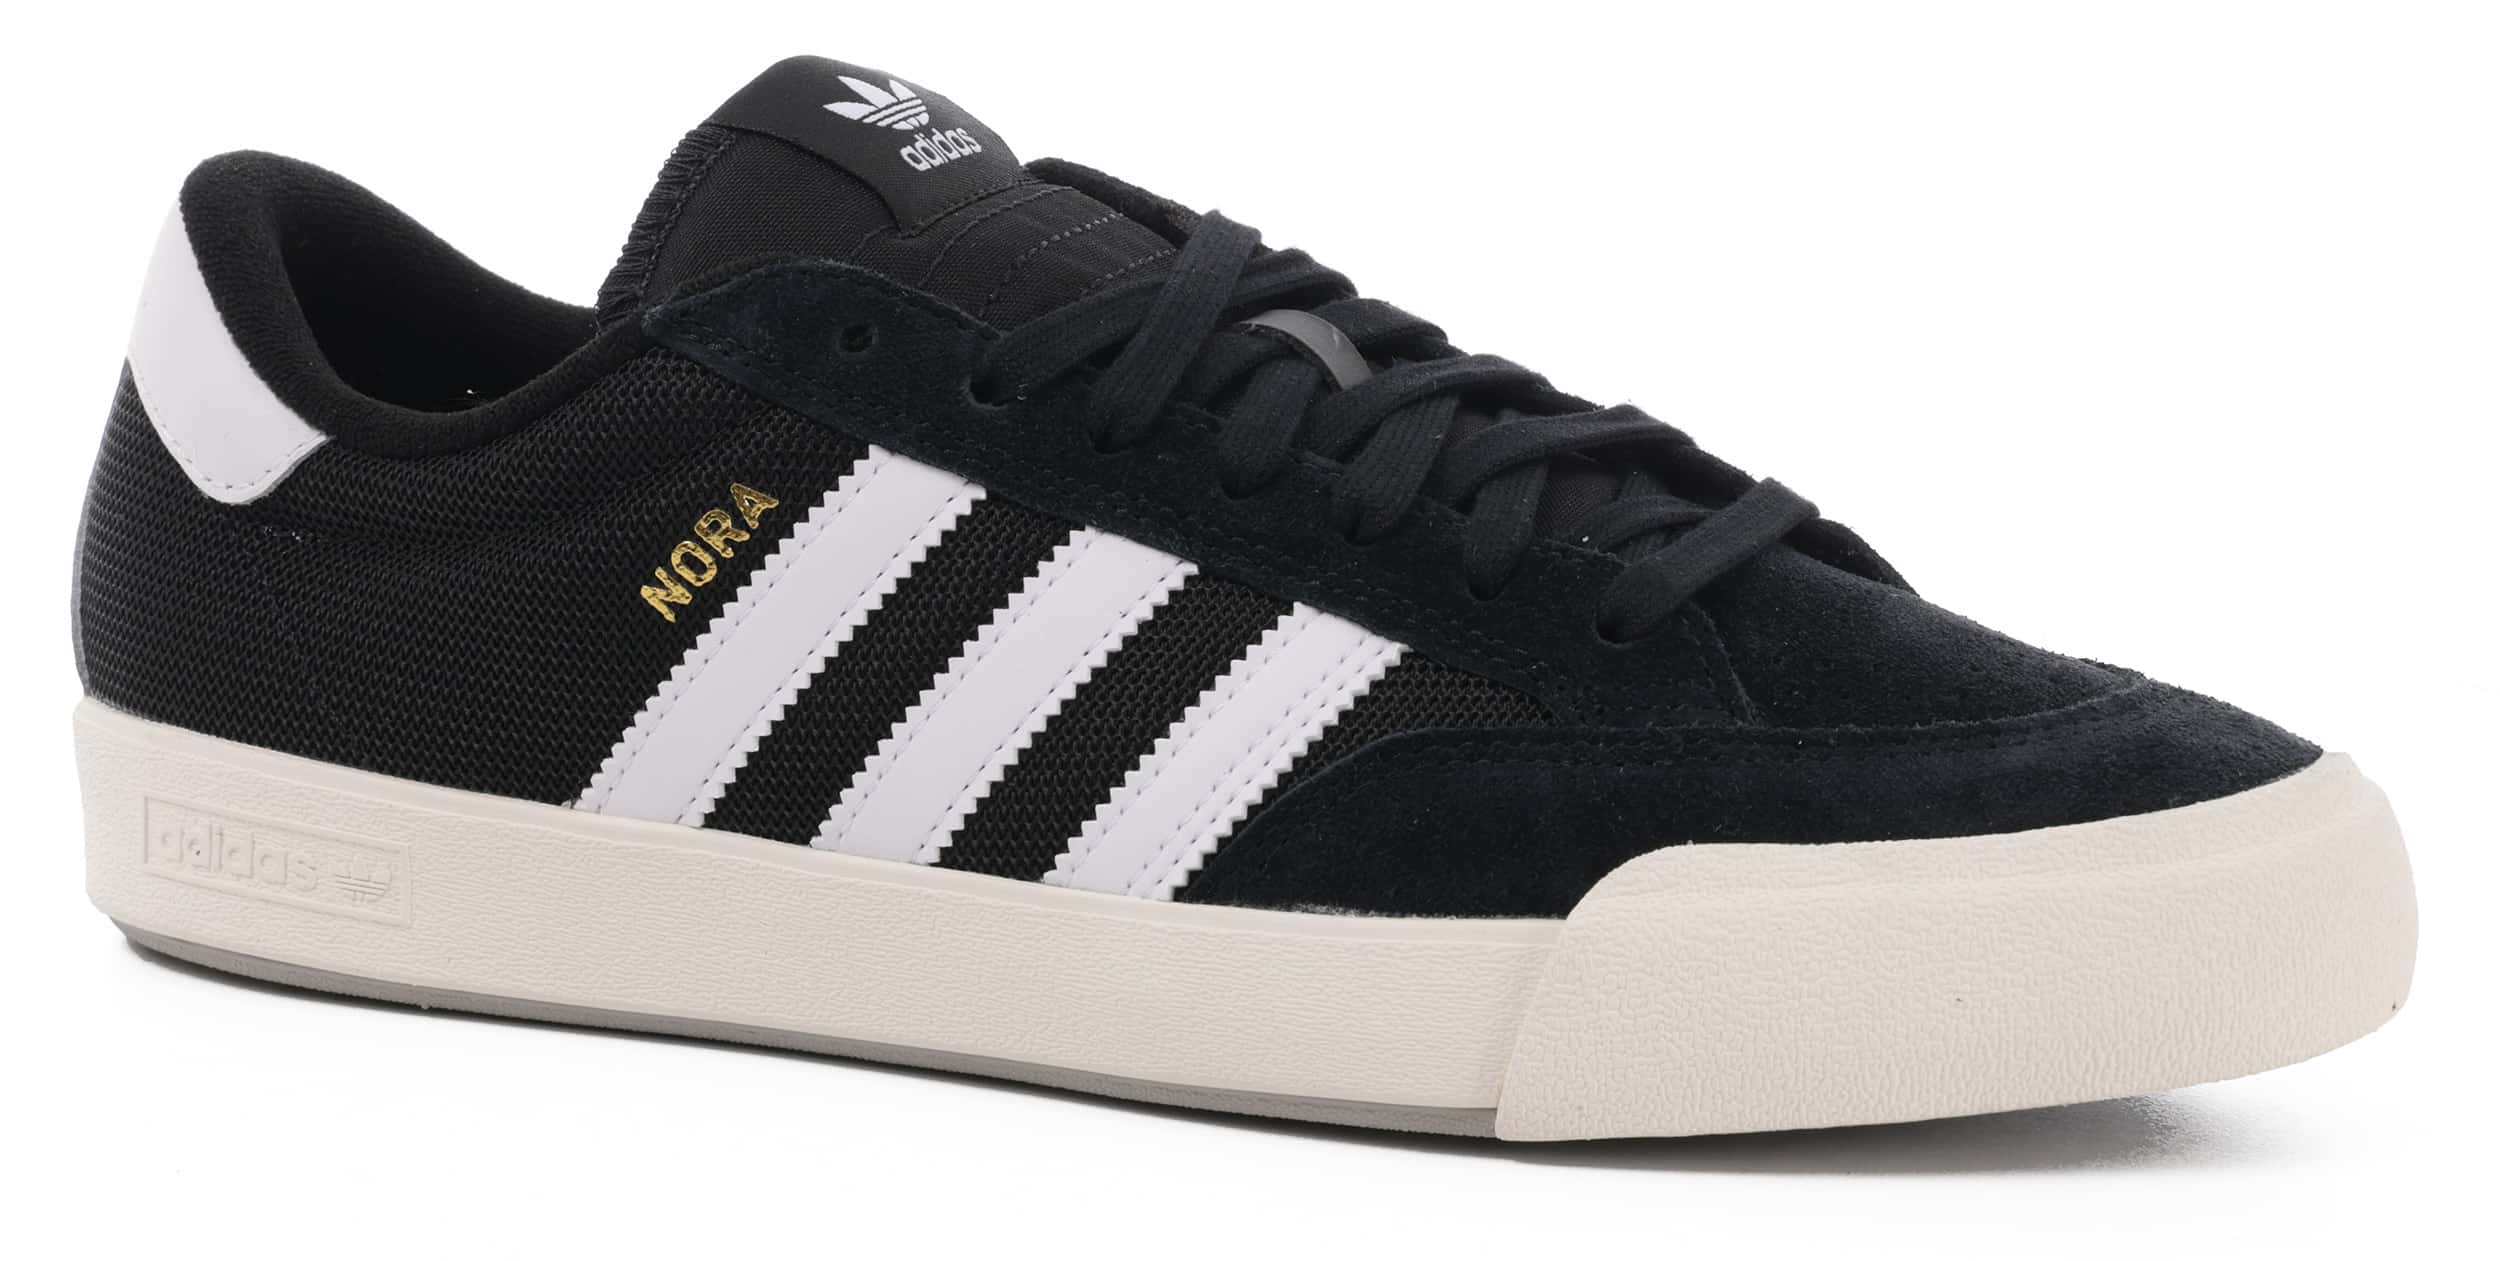 Adidas Nora Skate Shoes - core black/footwear white/grey two | Tactics